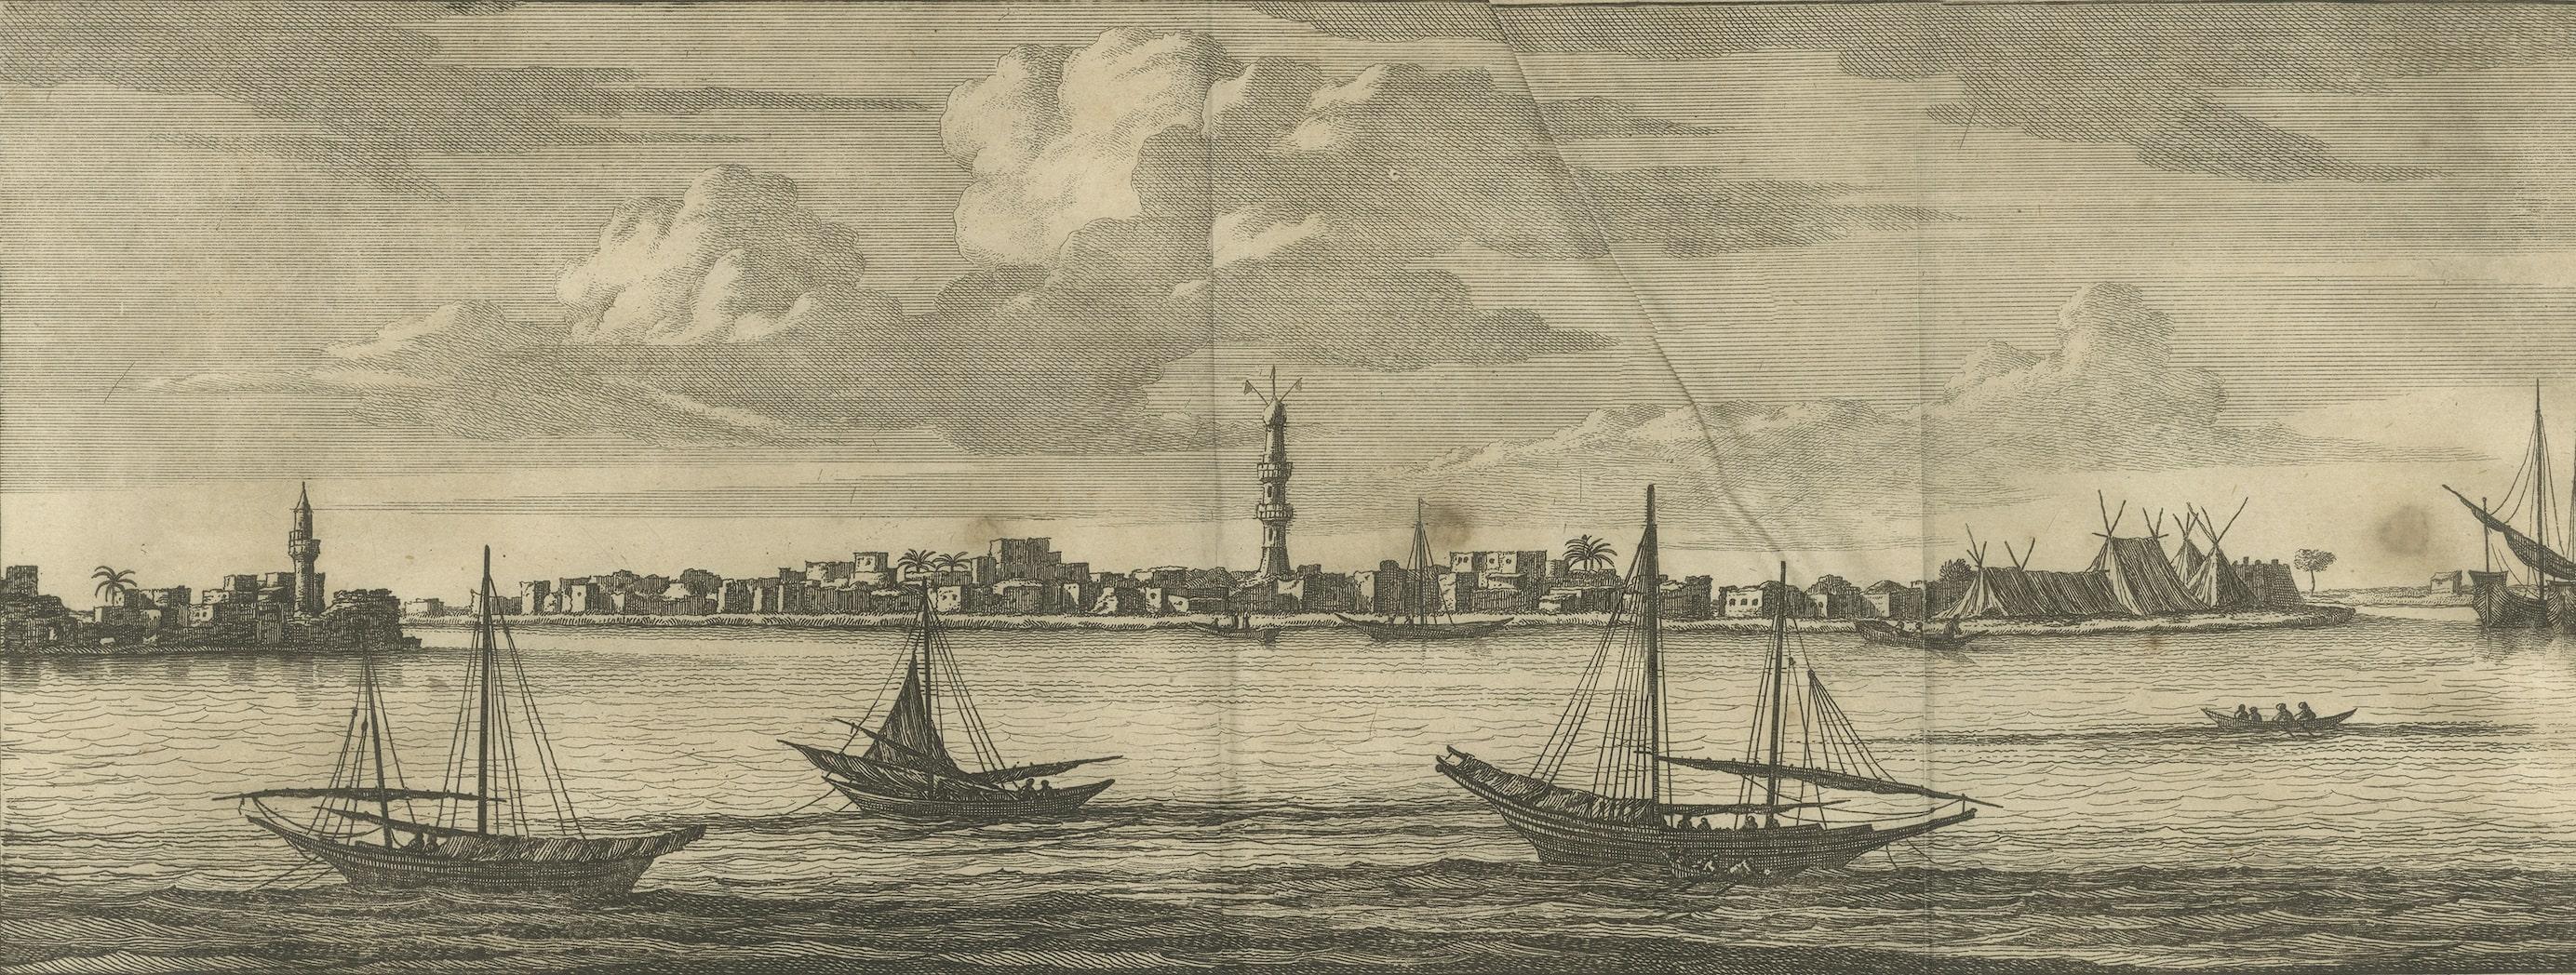 Engraved Original Antique Print with Views of the Nile, Egypt For Sale